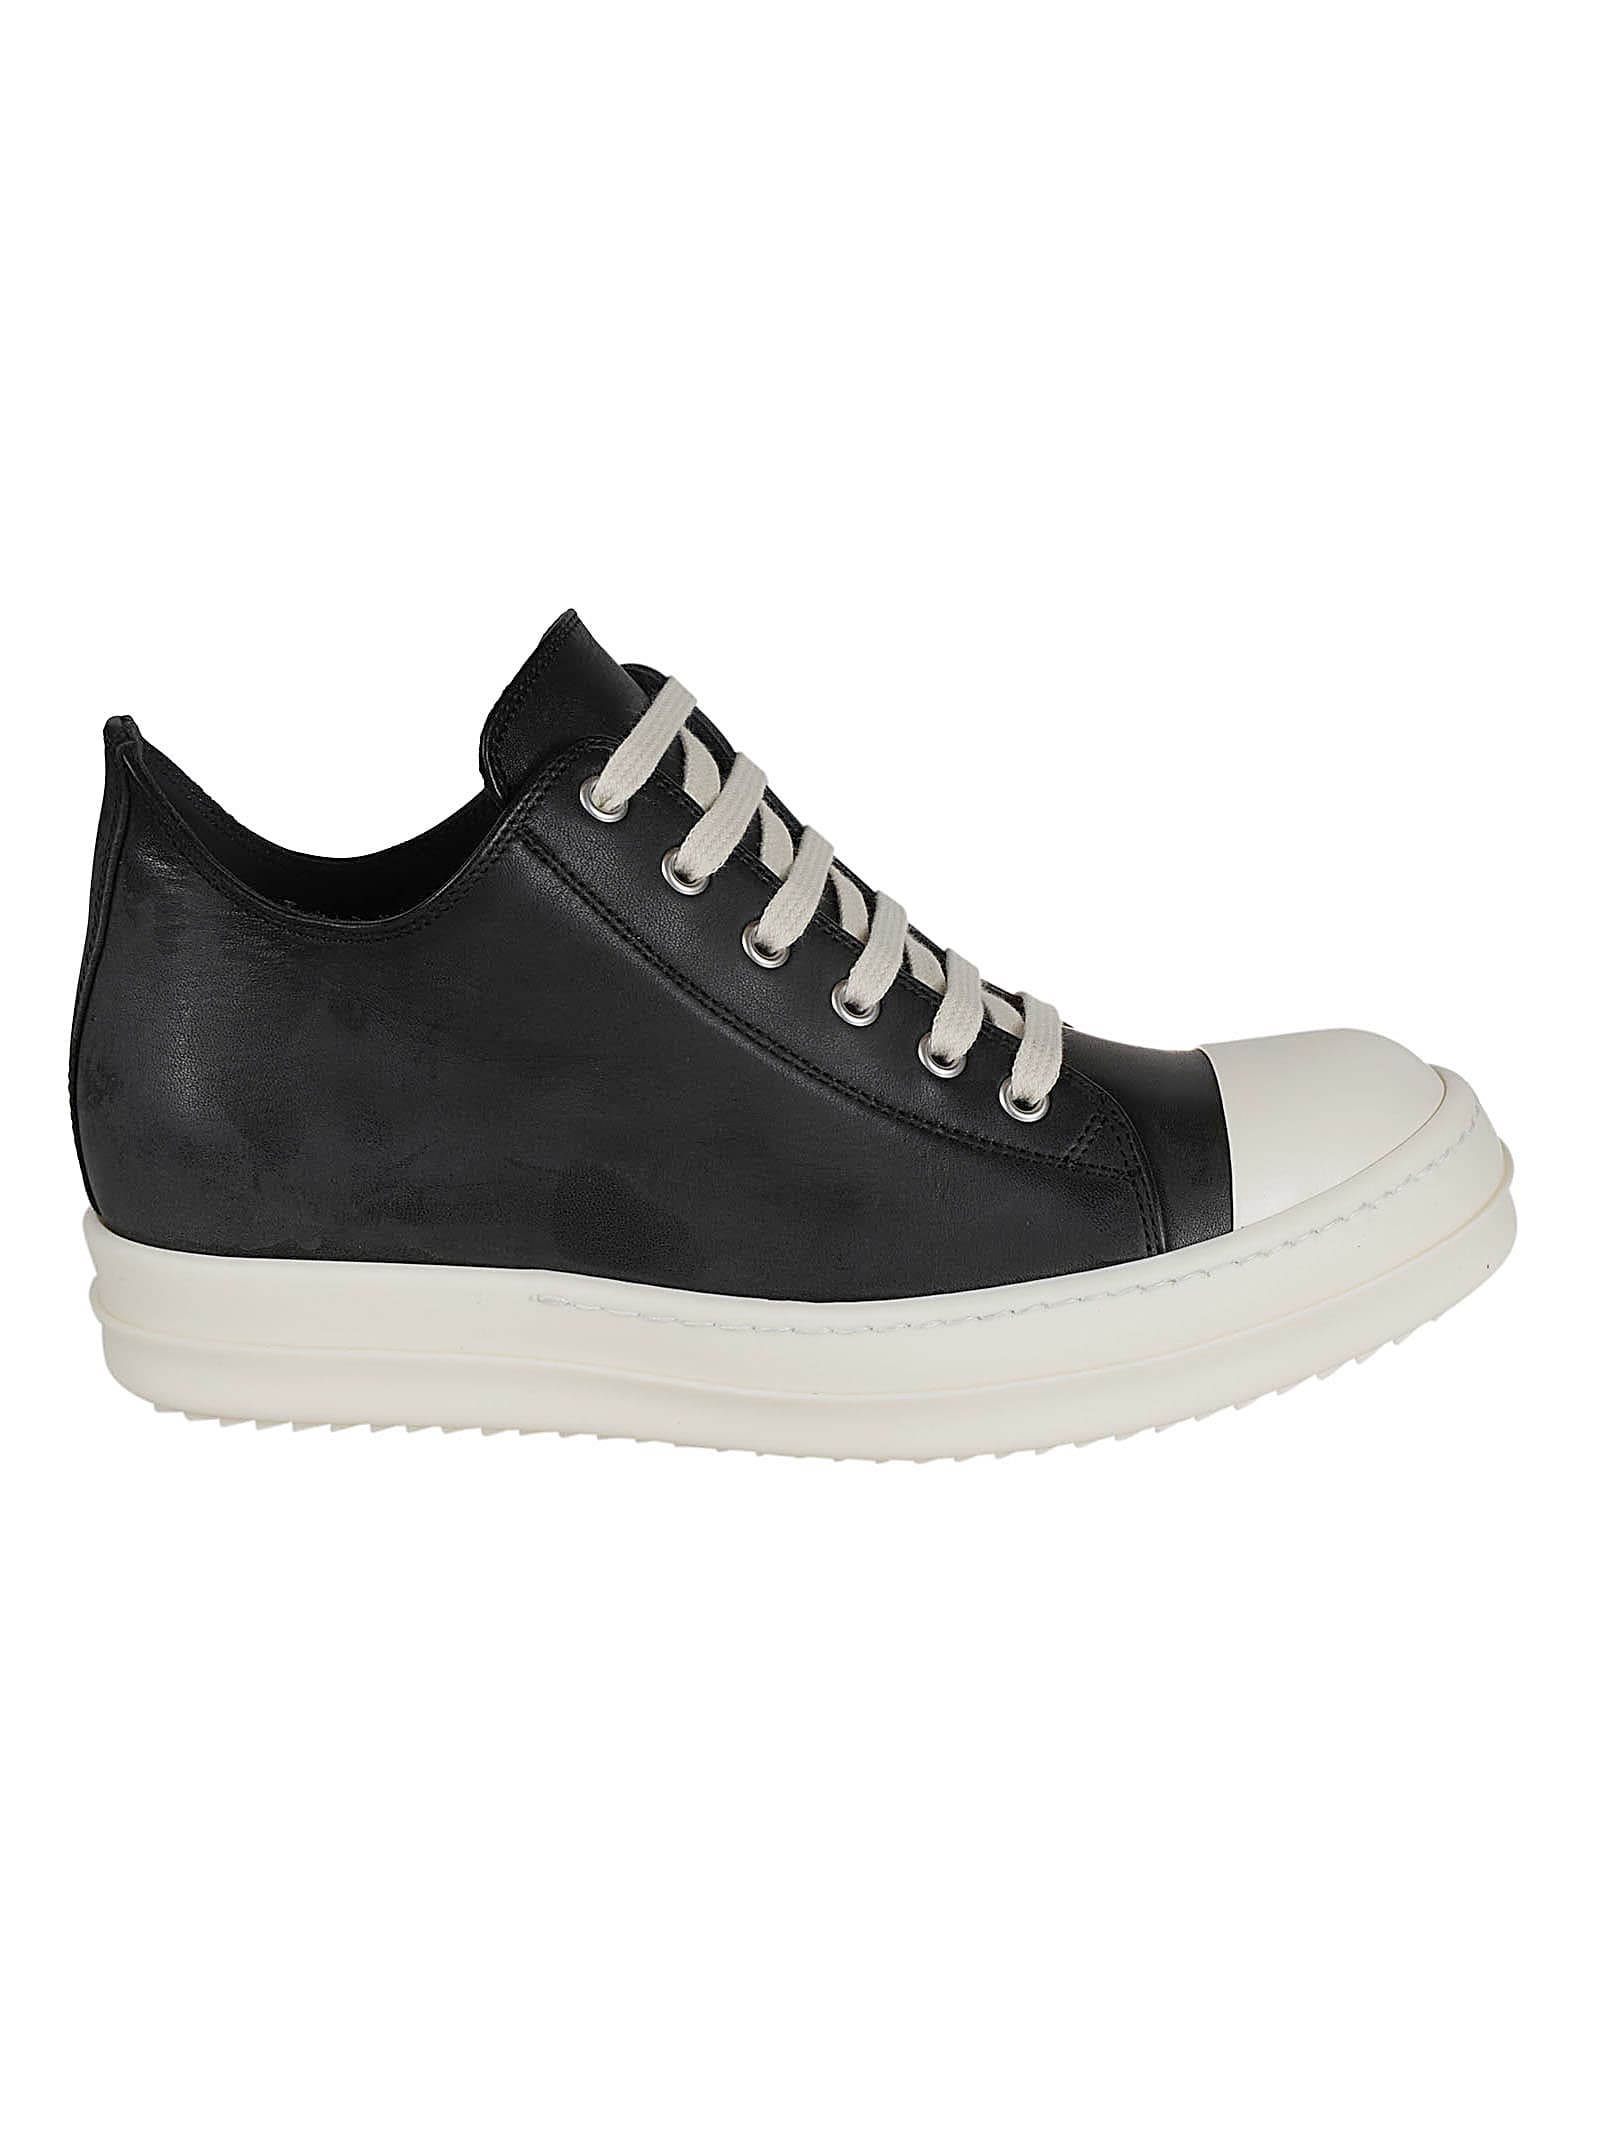 RICK OWENS LOW CLASSIC SNEAKERS